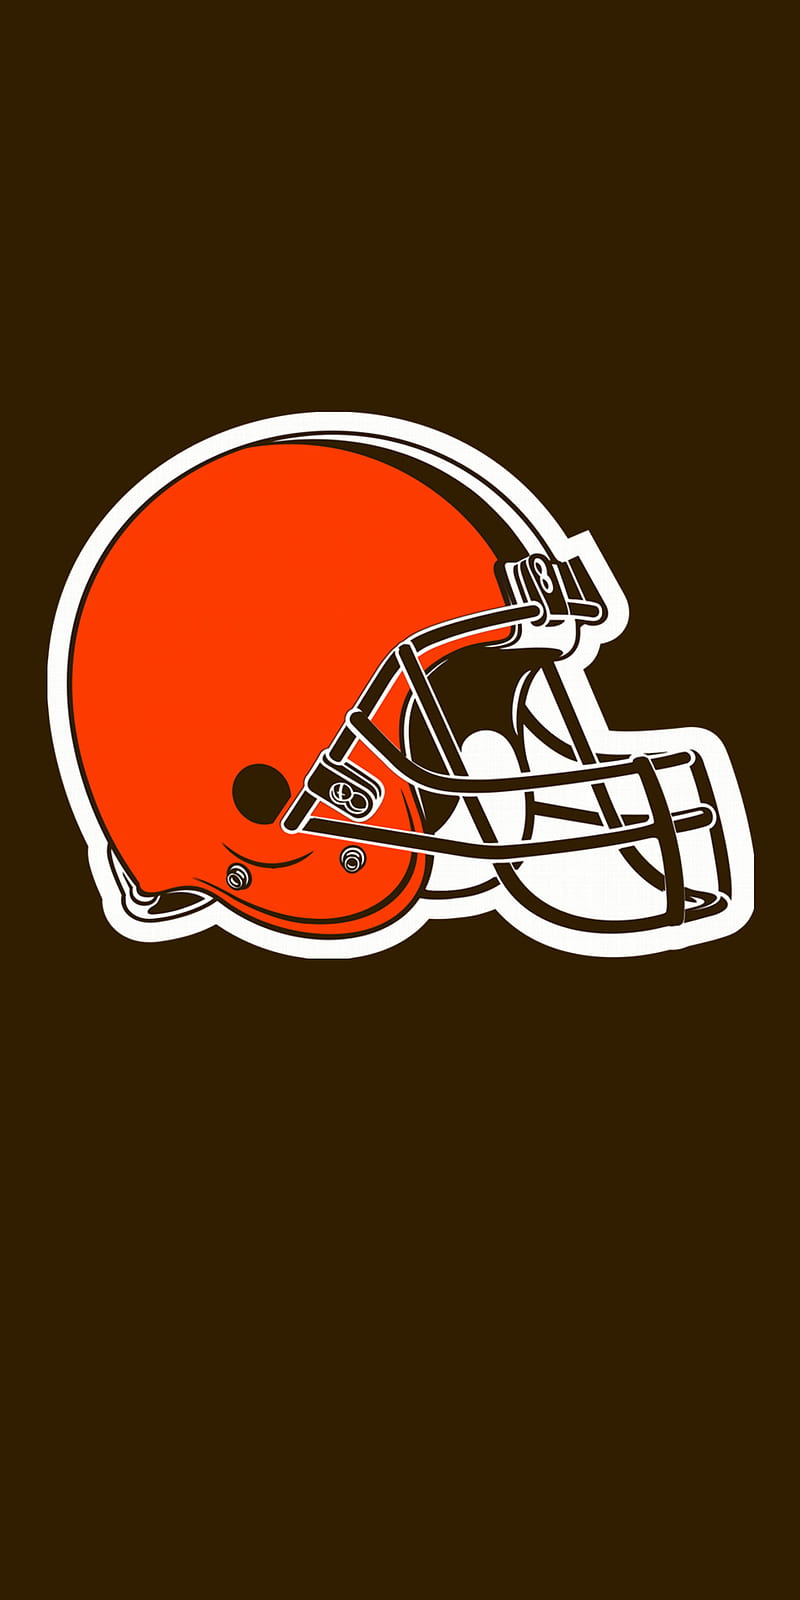 Aggregate 66+ wallpaper cleveland browns best - in.cdgdbentre